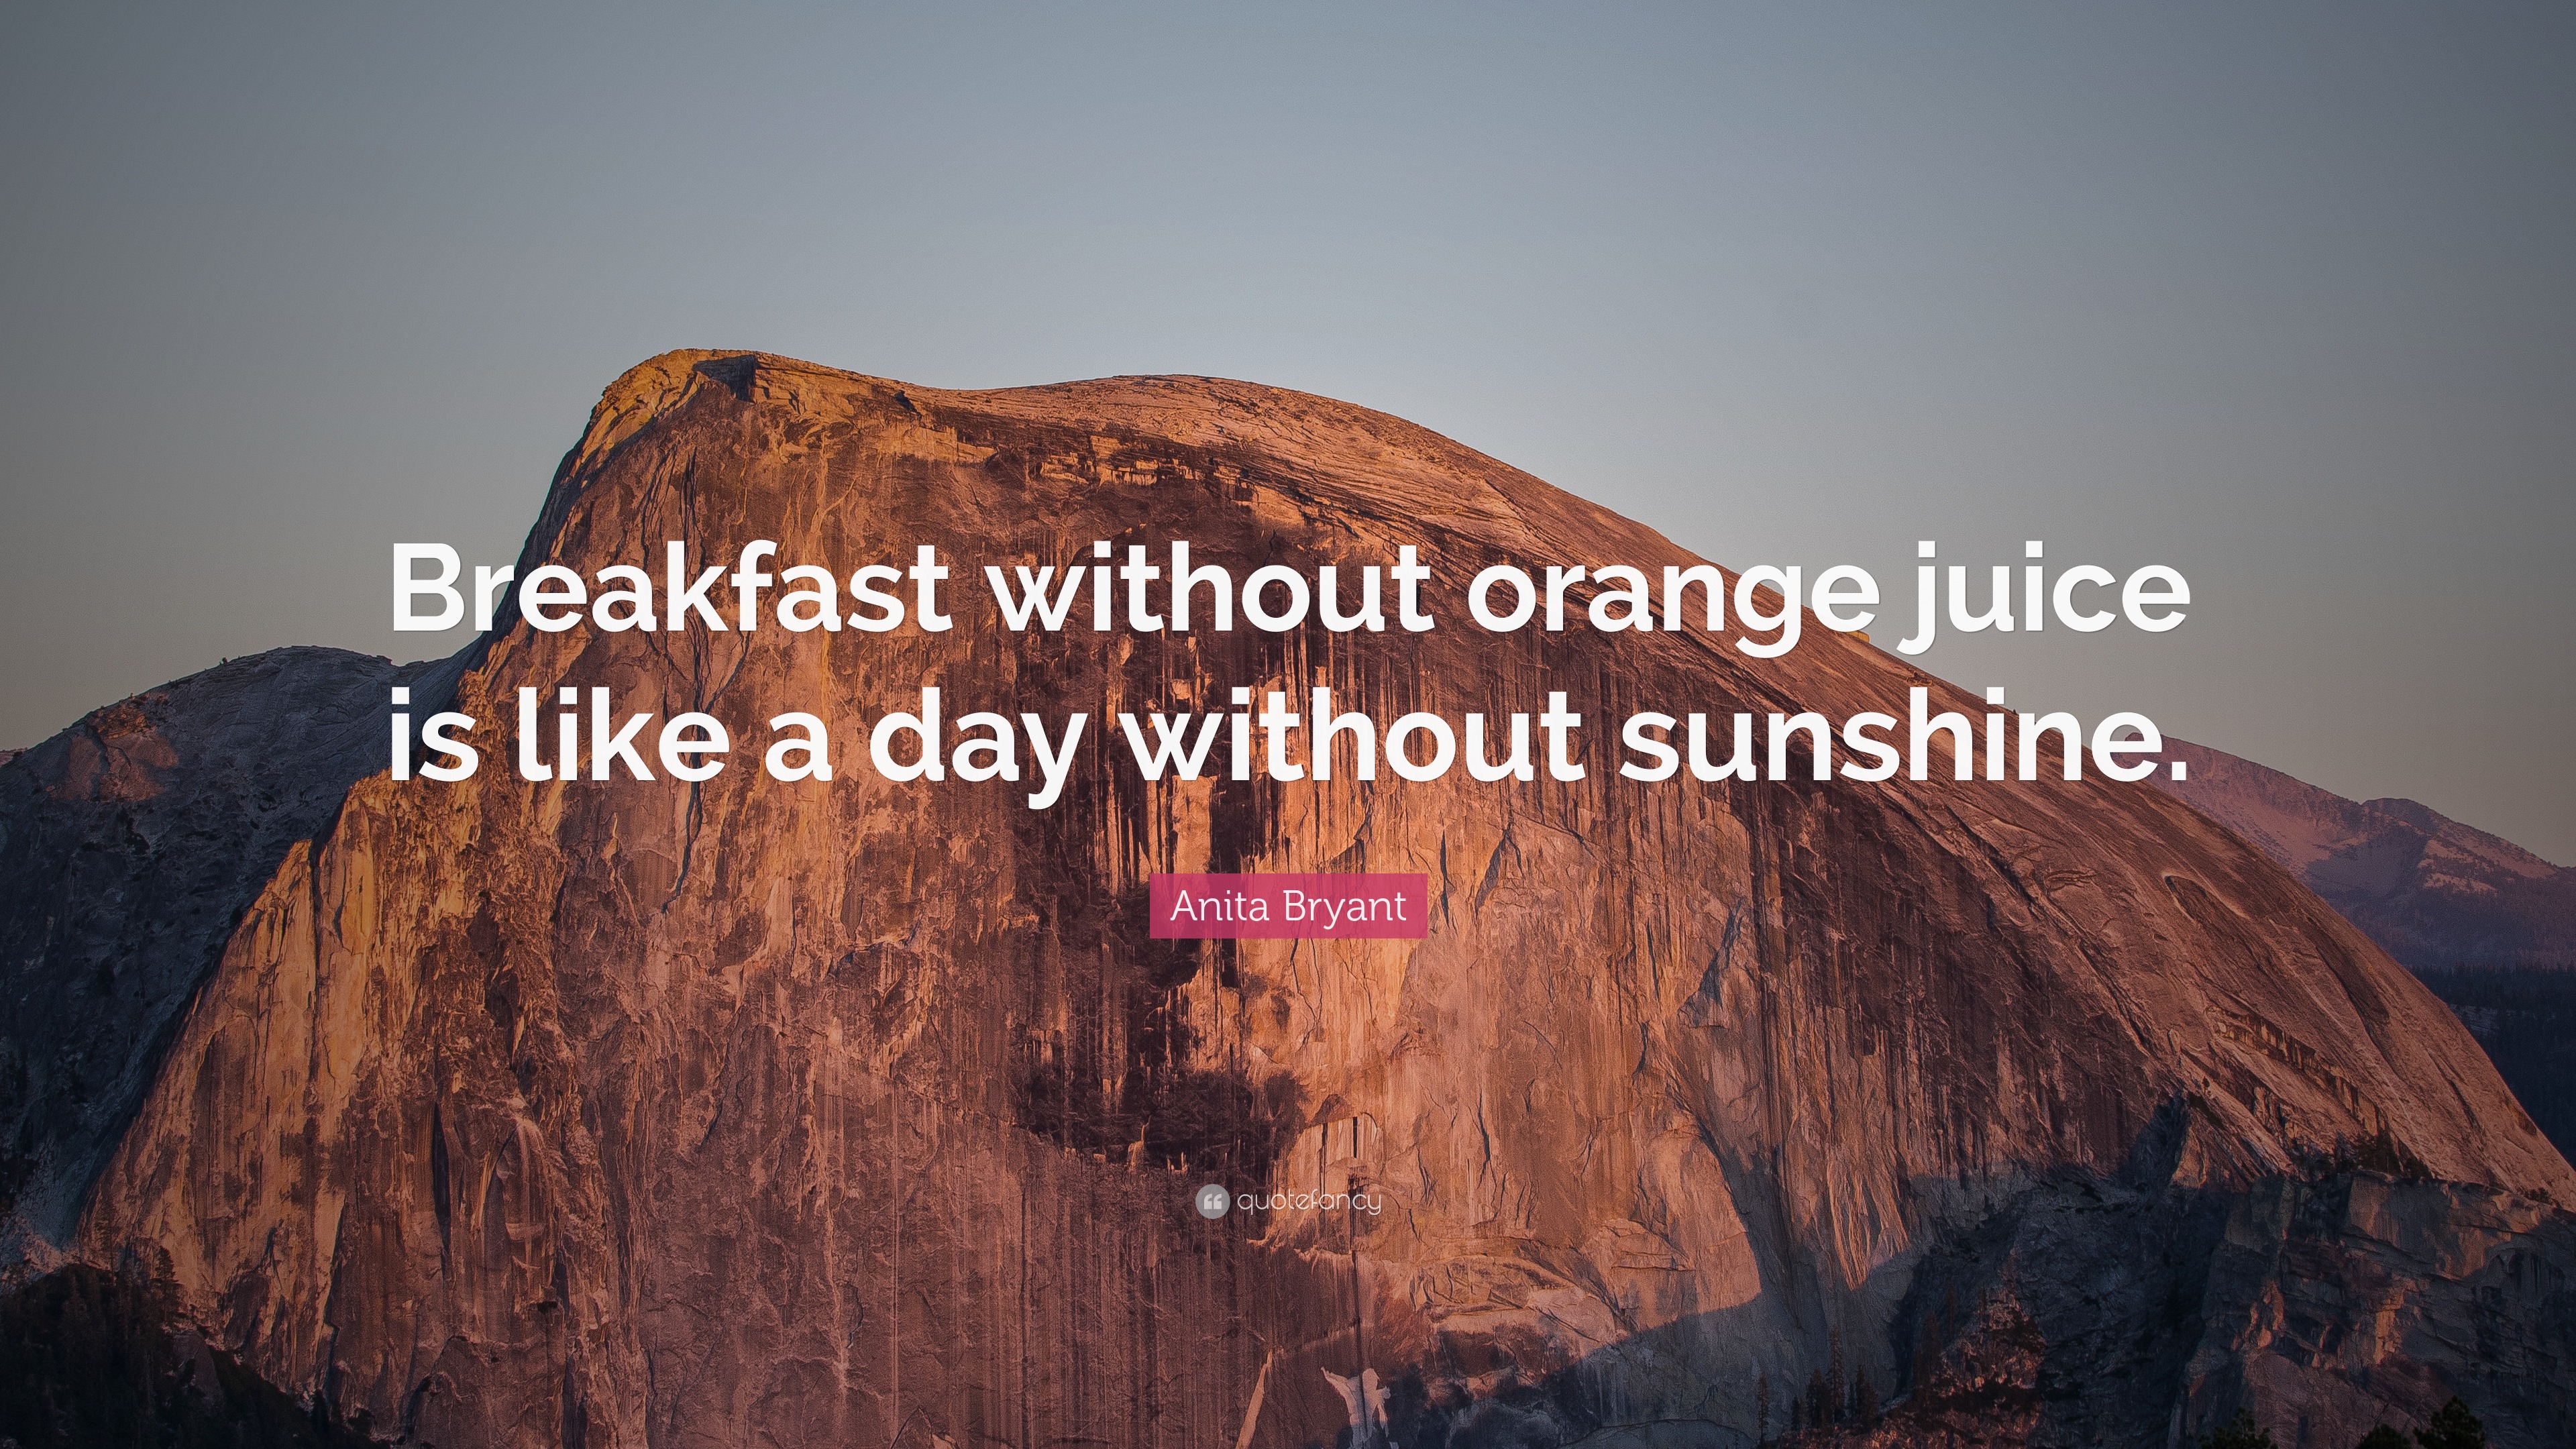 https://quotefancy.com/media/wallpaper/3840x2160/2346678-Anita-Bryant-Quote-Breakfast-without-orange-juice-is-like-a-day.jpg